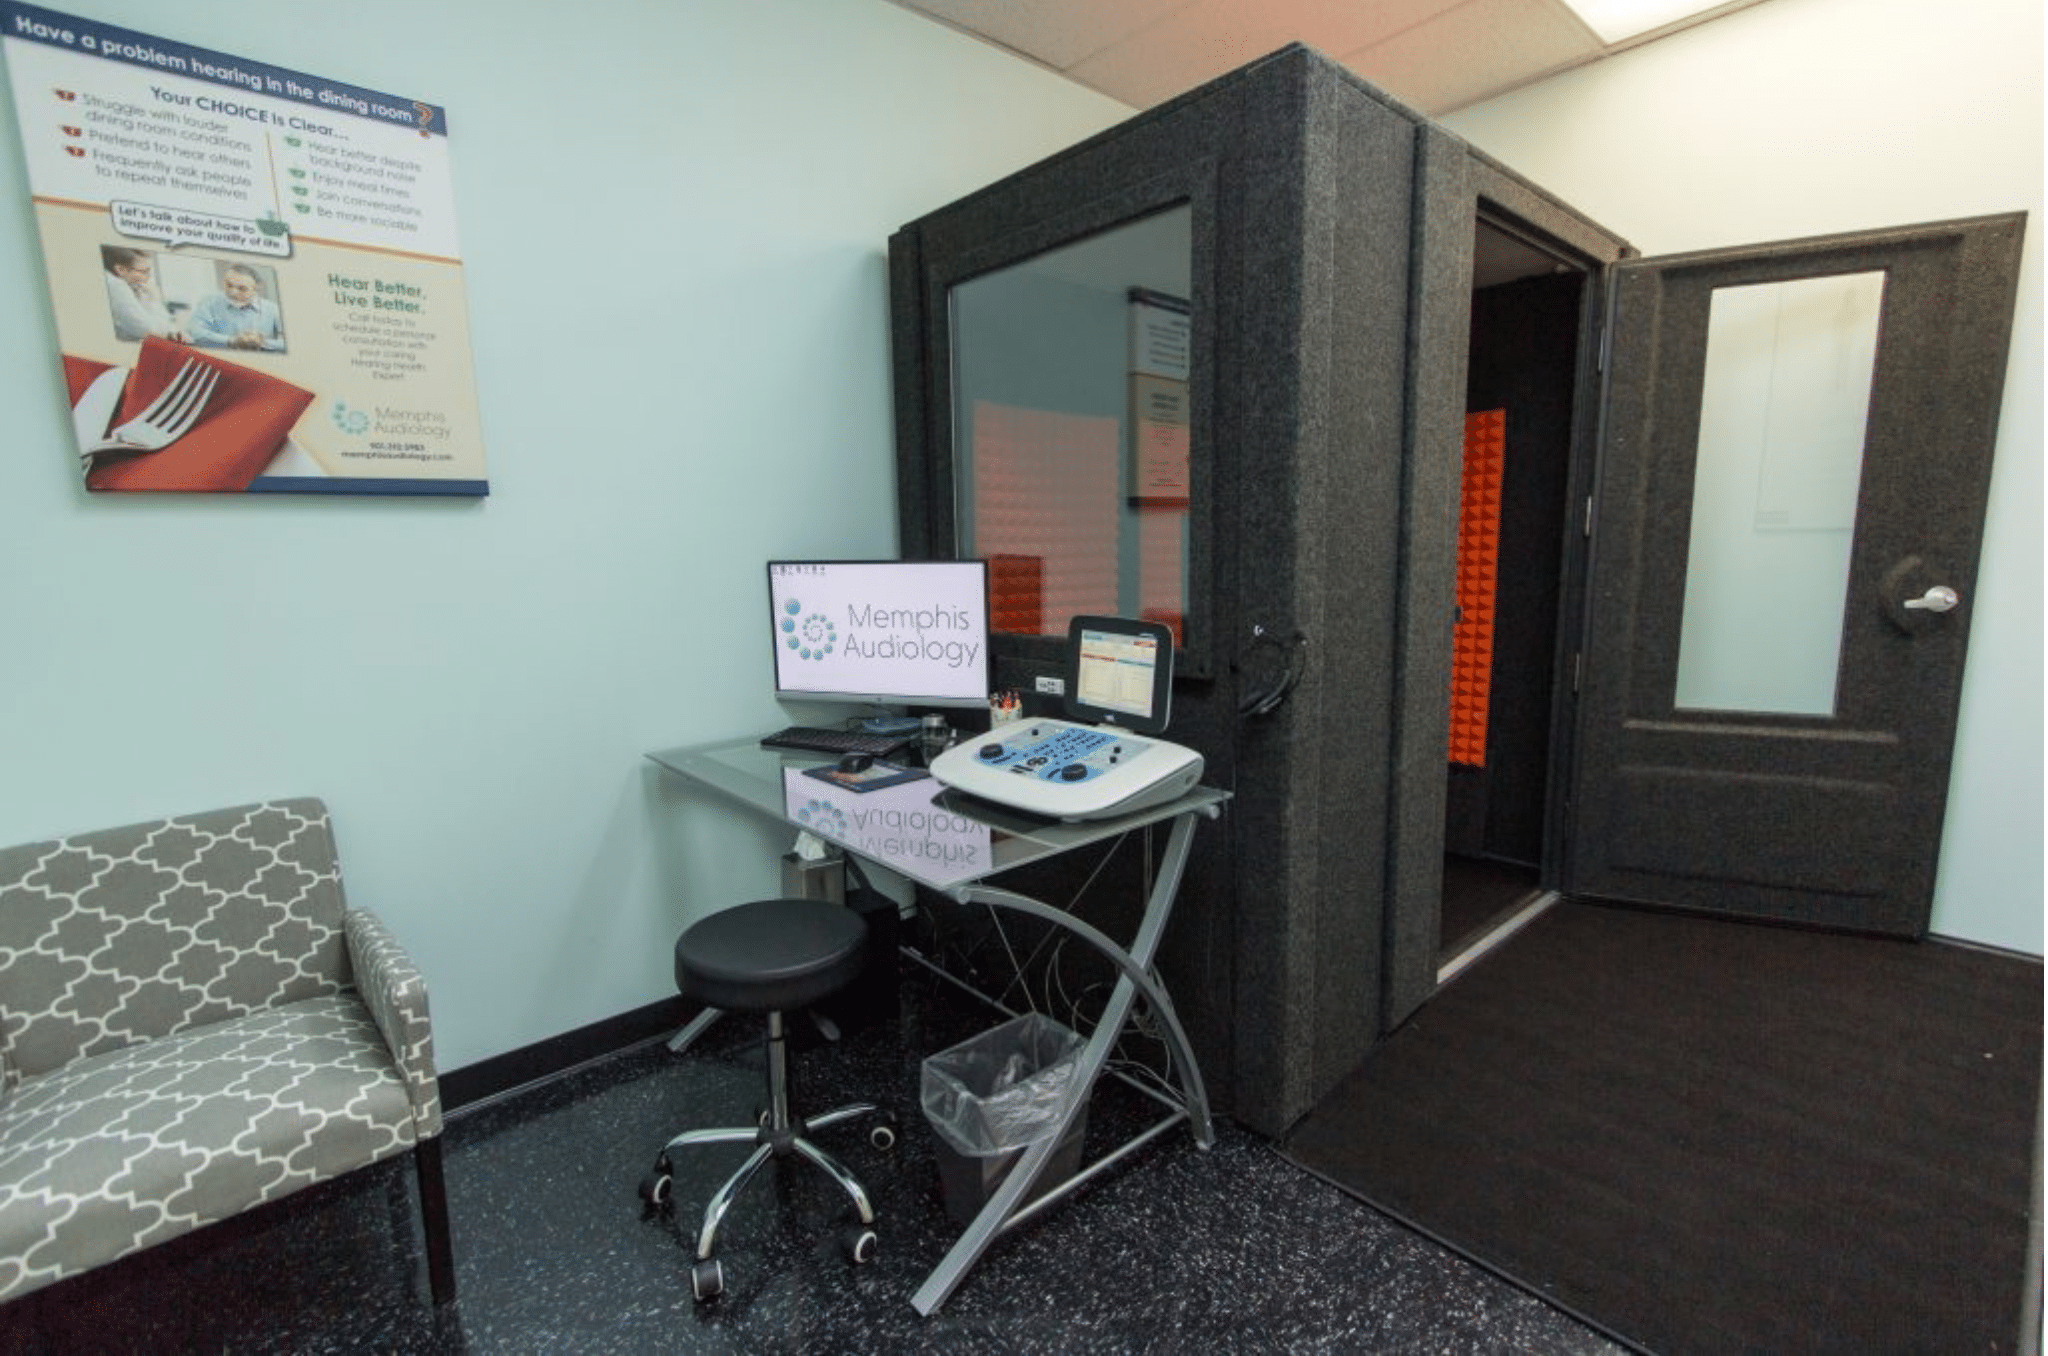 WhisperRoom audiometric booth at Memphis Audiology office, featuring Audiology testing equipment near the booth's window.